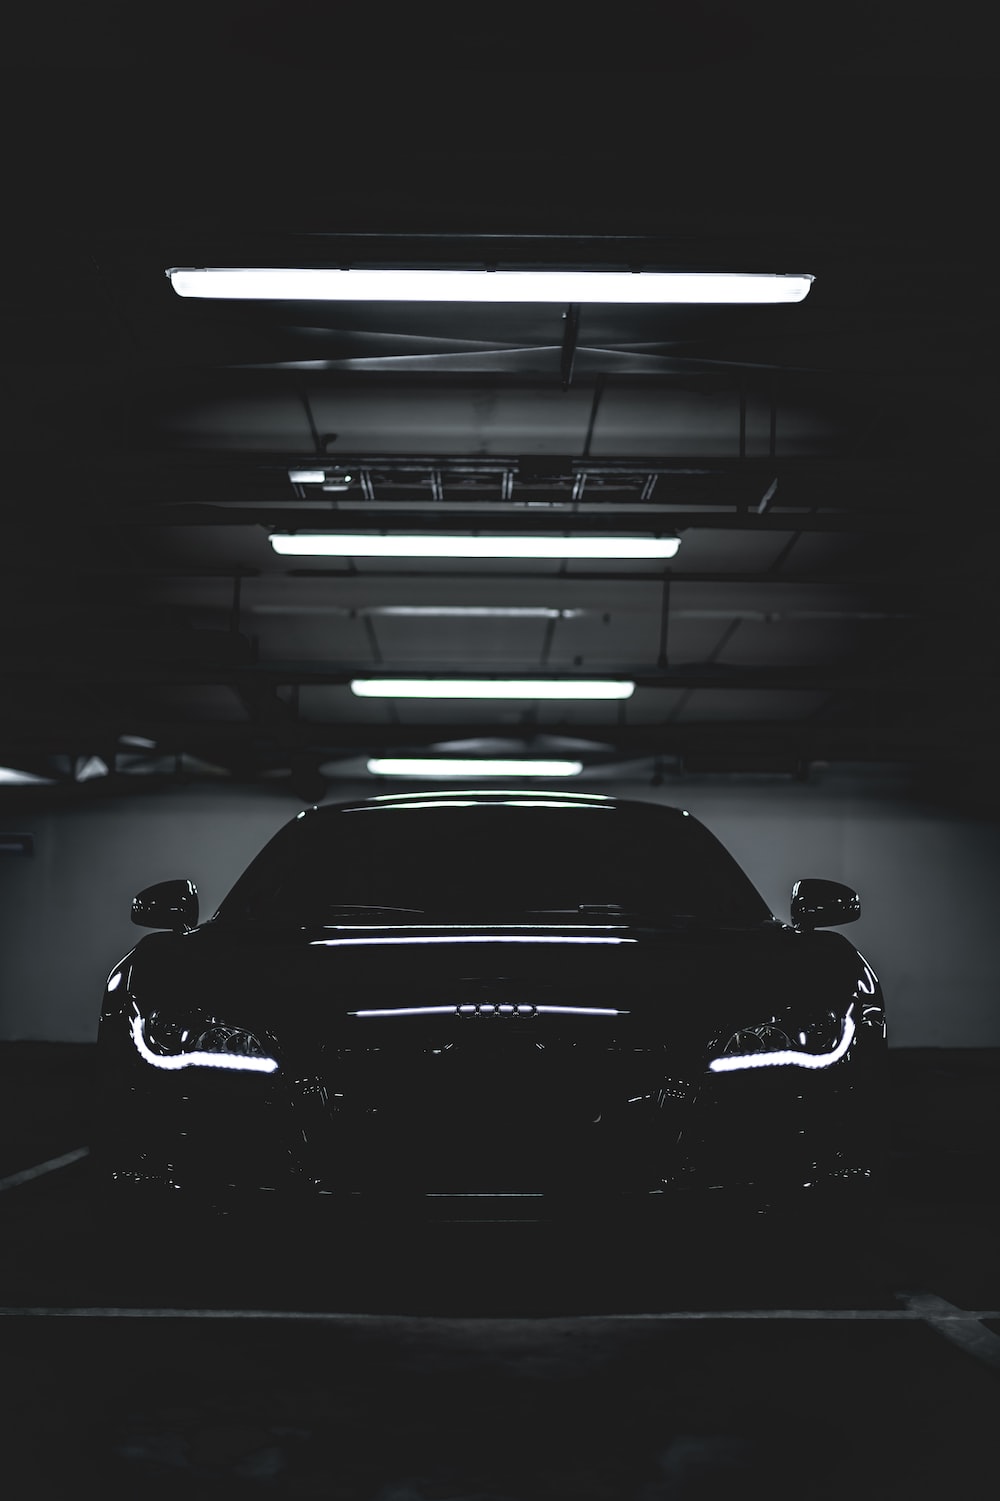 Black Car Picture [HD]. Download Free Image